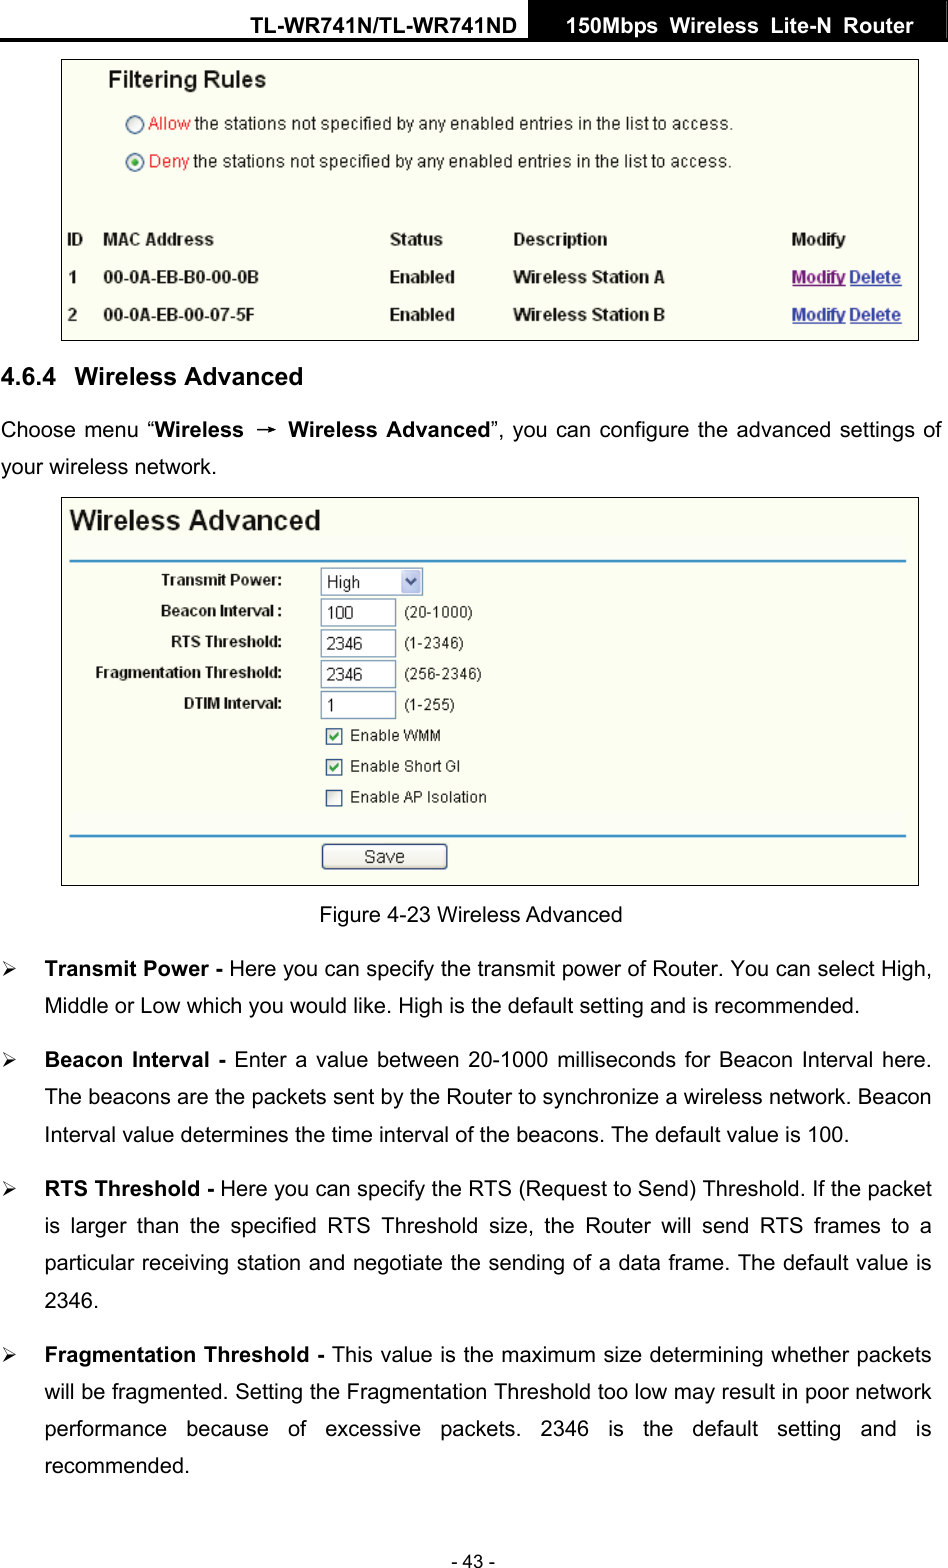 TL-WR741N/TL-WR741ND  150Mbps Wireless Lite-N Router   - 43 -  4.6.4  Wireless Advanced Choose menu “Wireless  → Wireless Advanced”, you can configure the advanced settings of your wireless network.  Figure 4-23 Wireless Advanced ¾ Transmit Power - Here you can specify the transmit power of Router. You can select High, Middle or Low which you would like. High is the default setting and is recommended. ¾ Beacon Interval - Enter a value between 20-1000 milliseconds for Beacon Interval here. The beacons are the packets sent by the Router to synchronize a wireless network. Beacon Interval value determines the time interval of the beacons. The default value is 100.   ¾ RTS Threshold - Here you can specify the RTS (Request to Send) Threshold. If the packet is larger than the specified RTS Threshold size, the Router will send RTS frames to a particular receiving station and negotiate the sending of a data frame. The default value is 2346.  ¾ Fragmentation Threshold - This value is the maximum size determining whether packets will be fragmented. Setting the Fragmentation Threshold too low may result in poor network performance because of excessive packets. 2346 is the default setting and is recommended.  